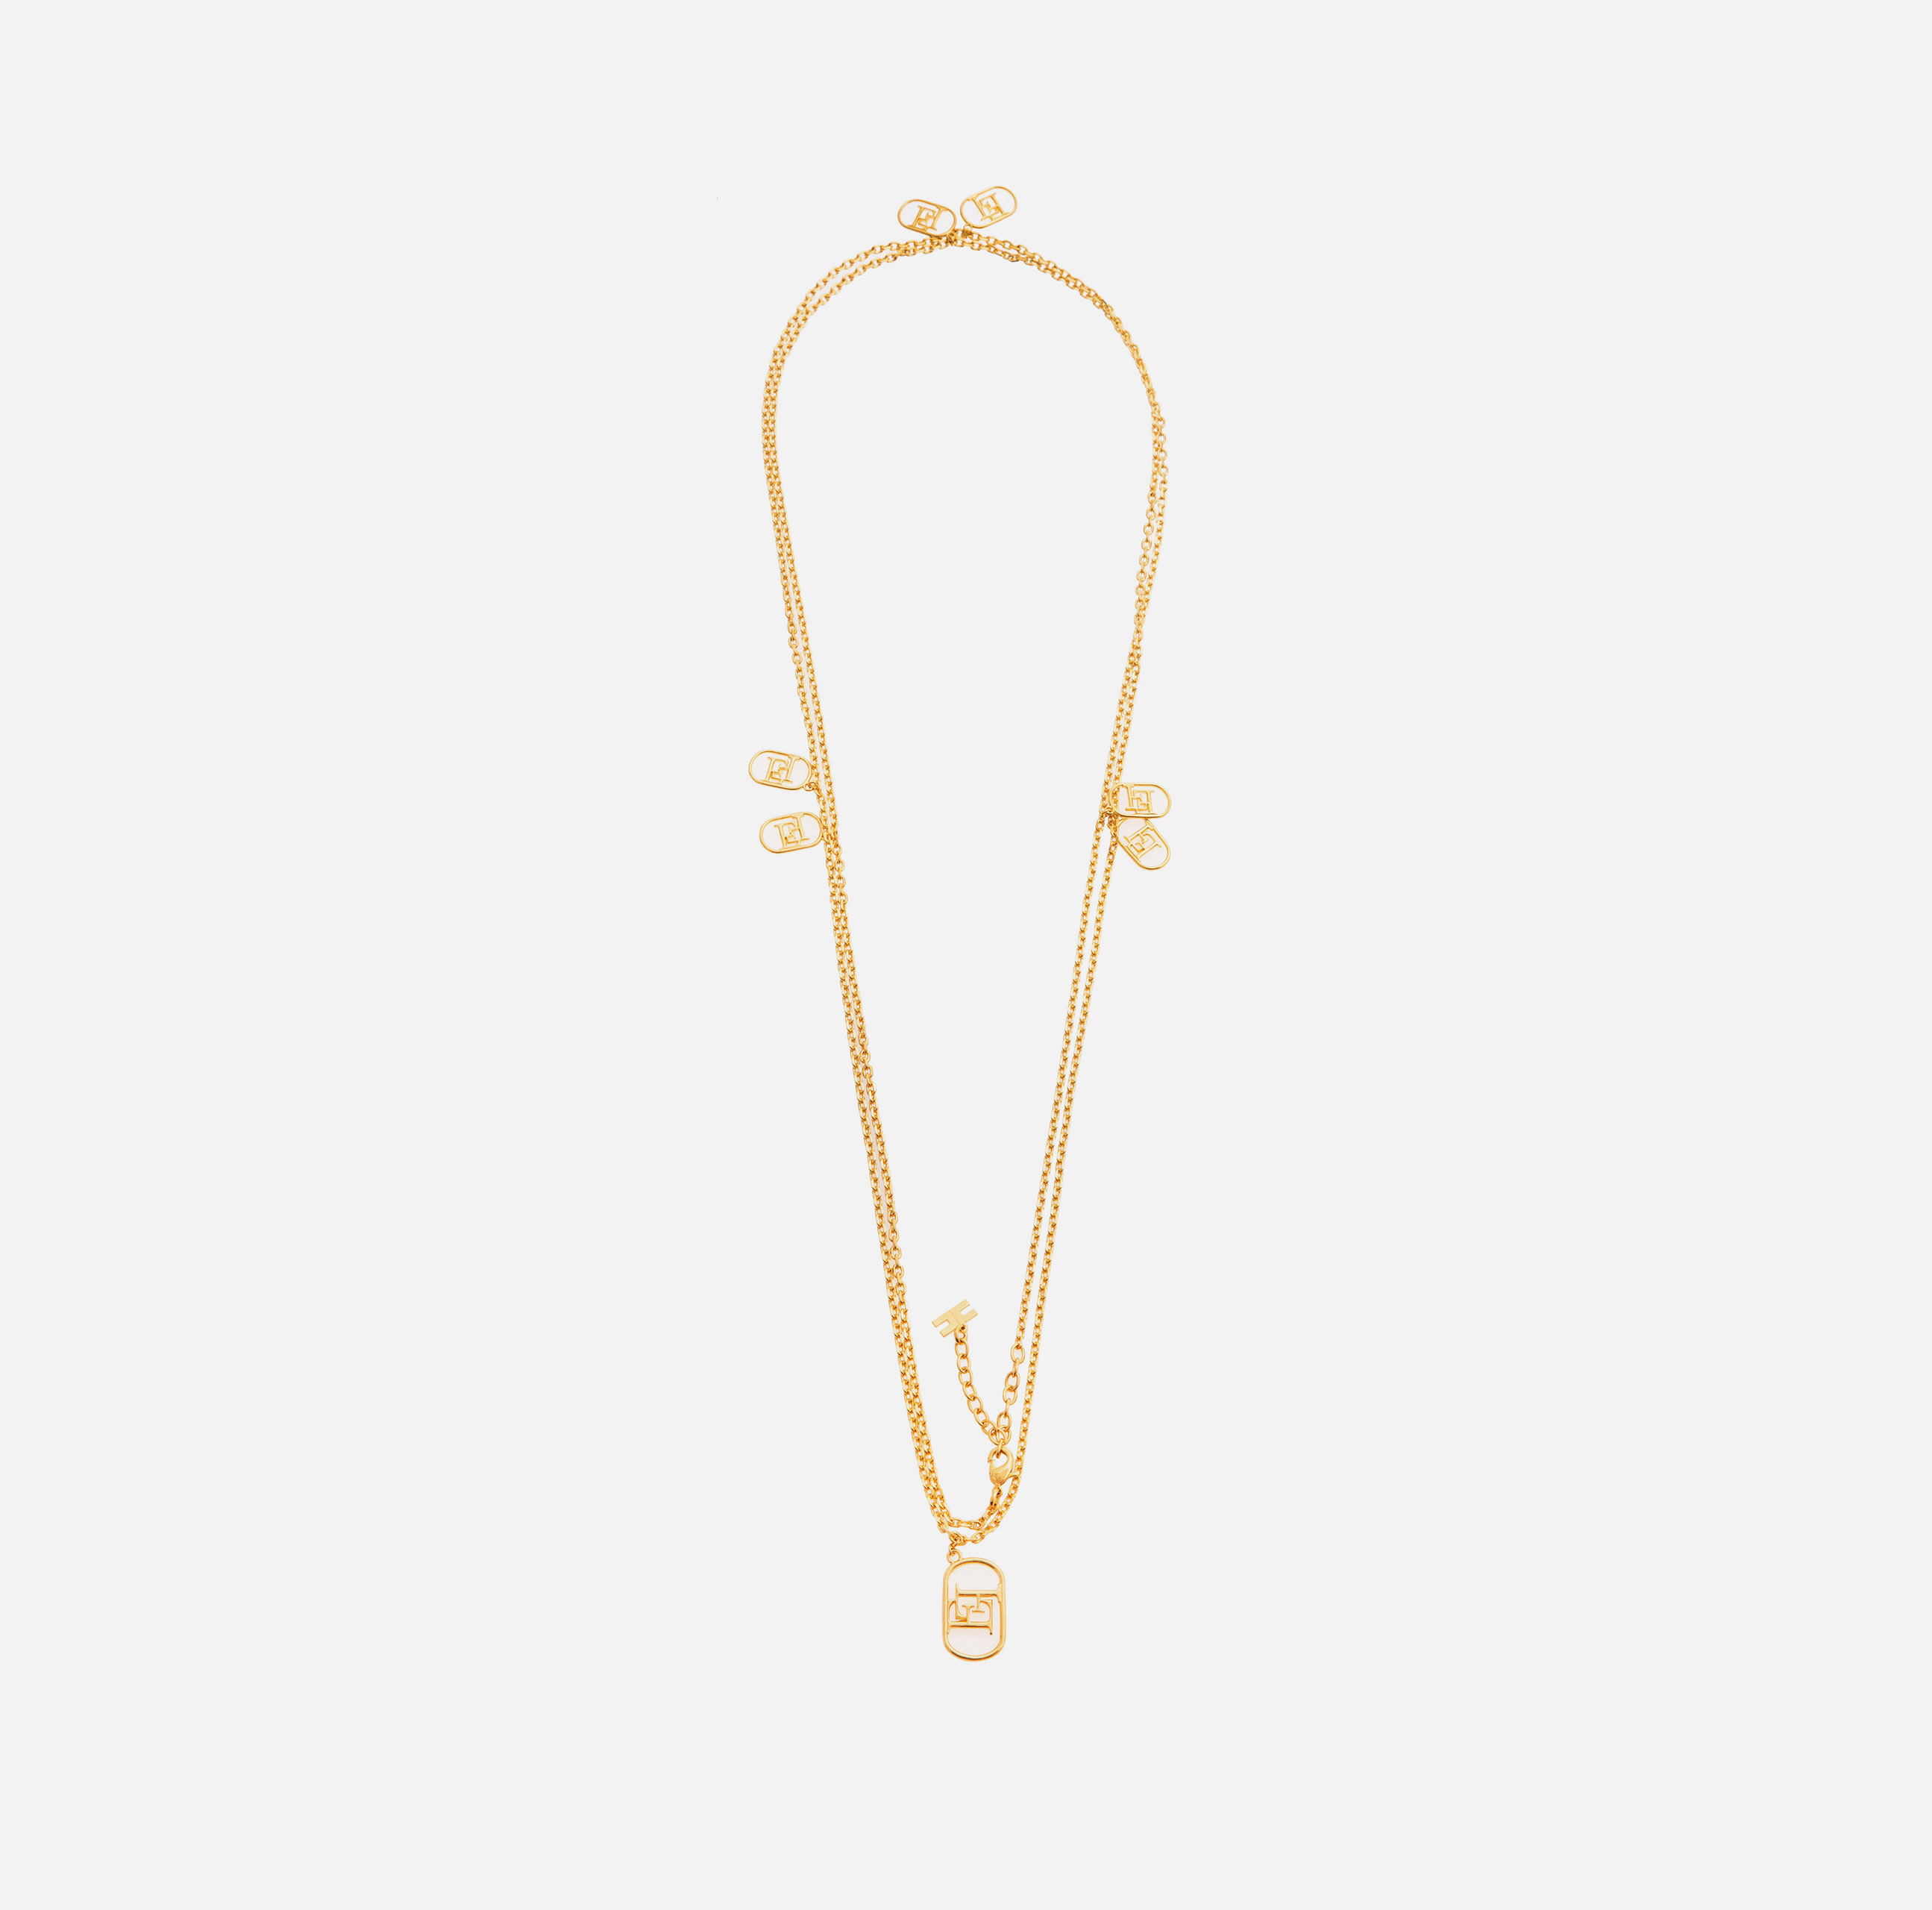 Long necklace with logo charms - Elisabetta Franchi